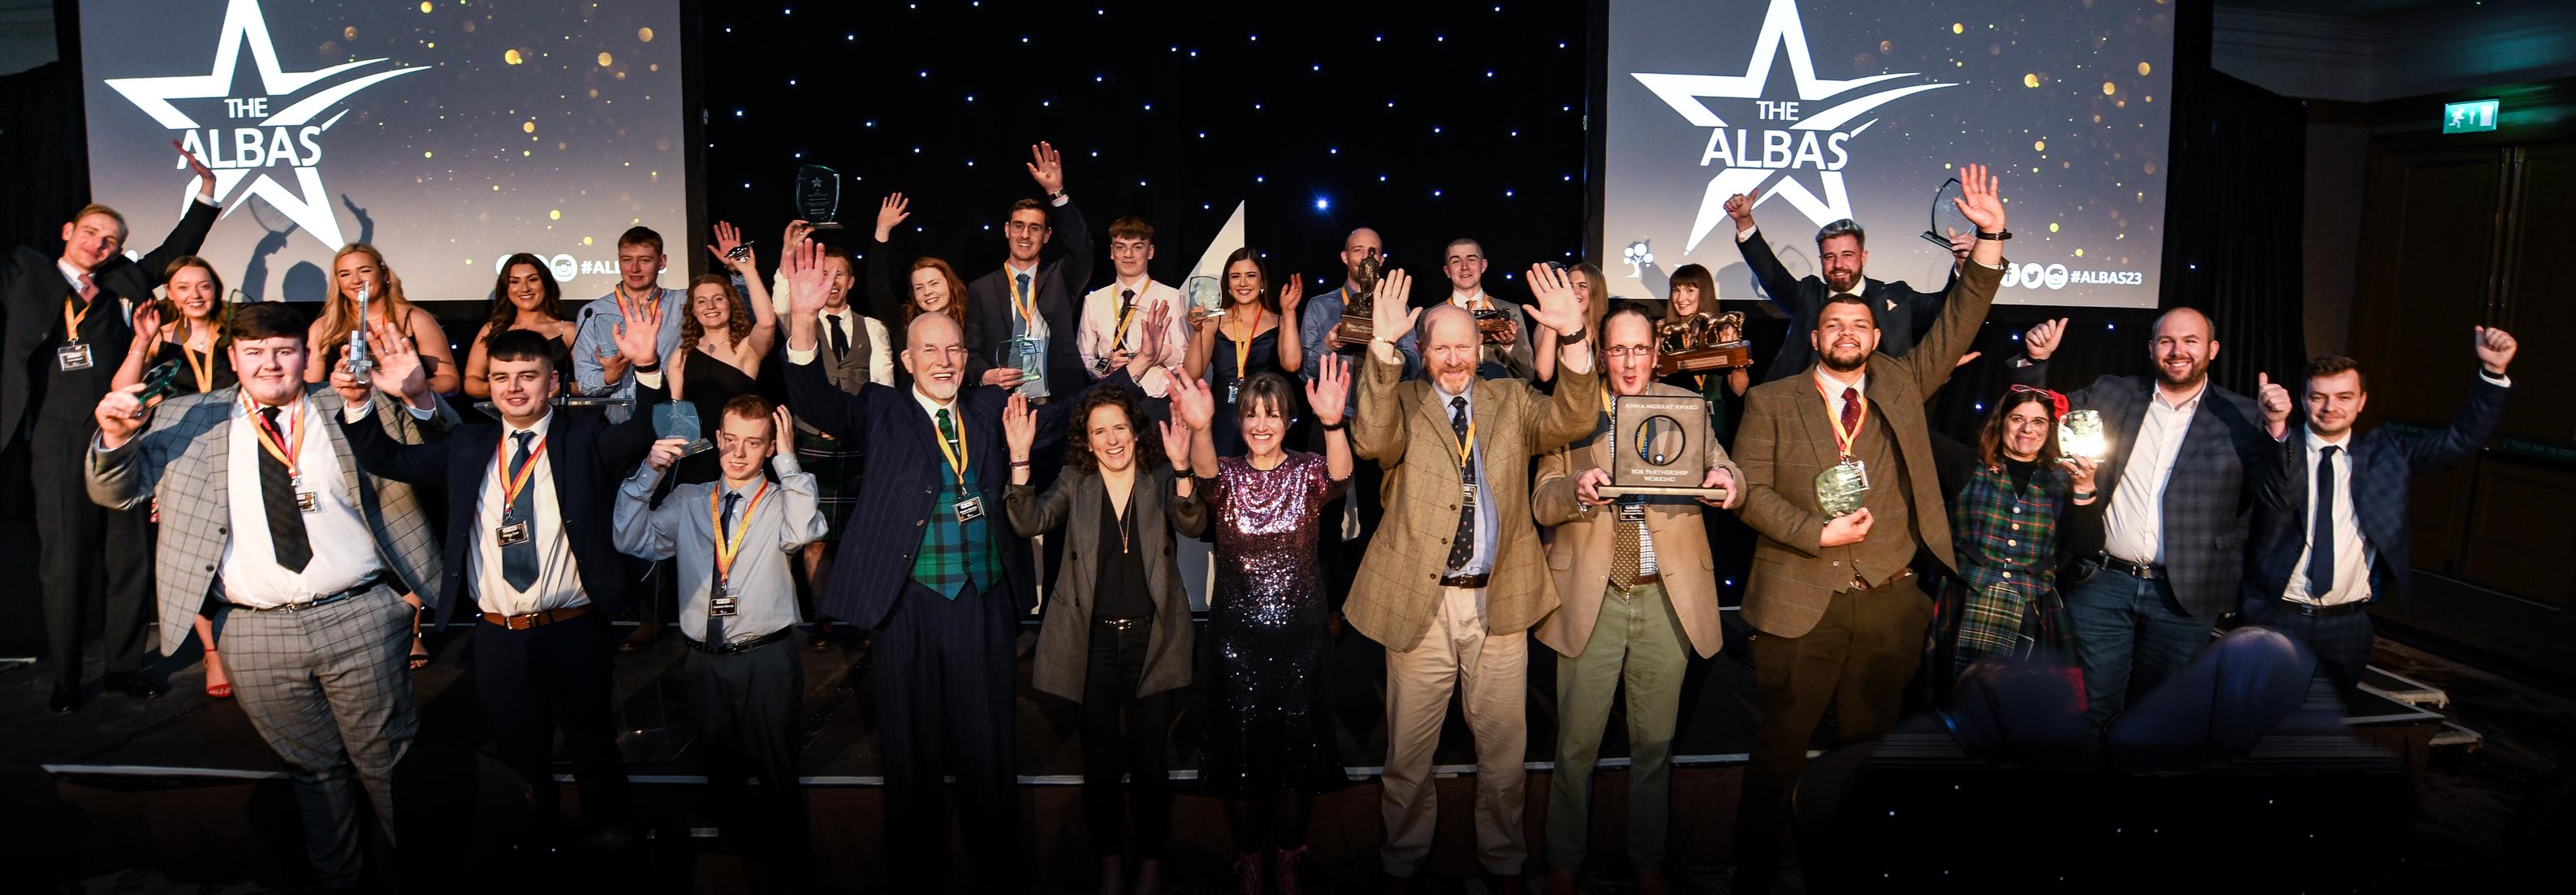 Success for students and graduates at Lantra Scotland’s Awards for Land-based and Aquaculture Skills